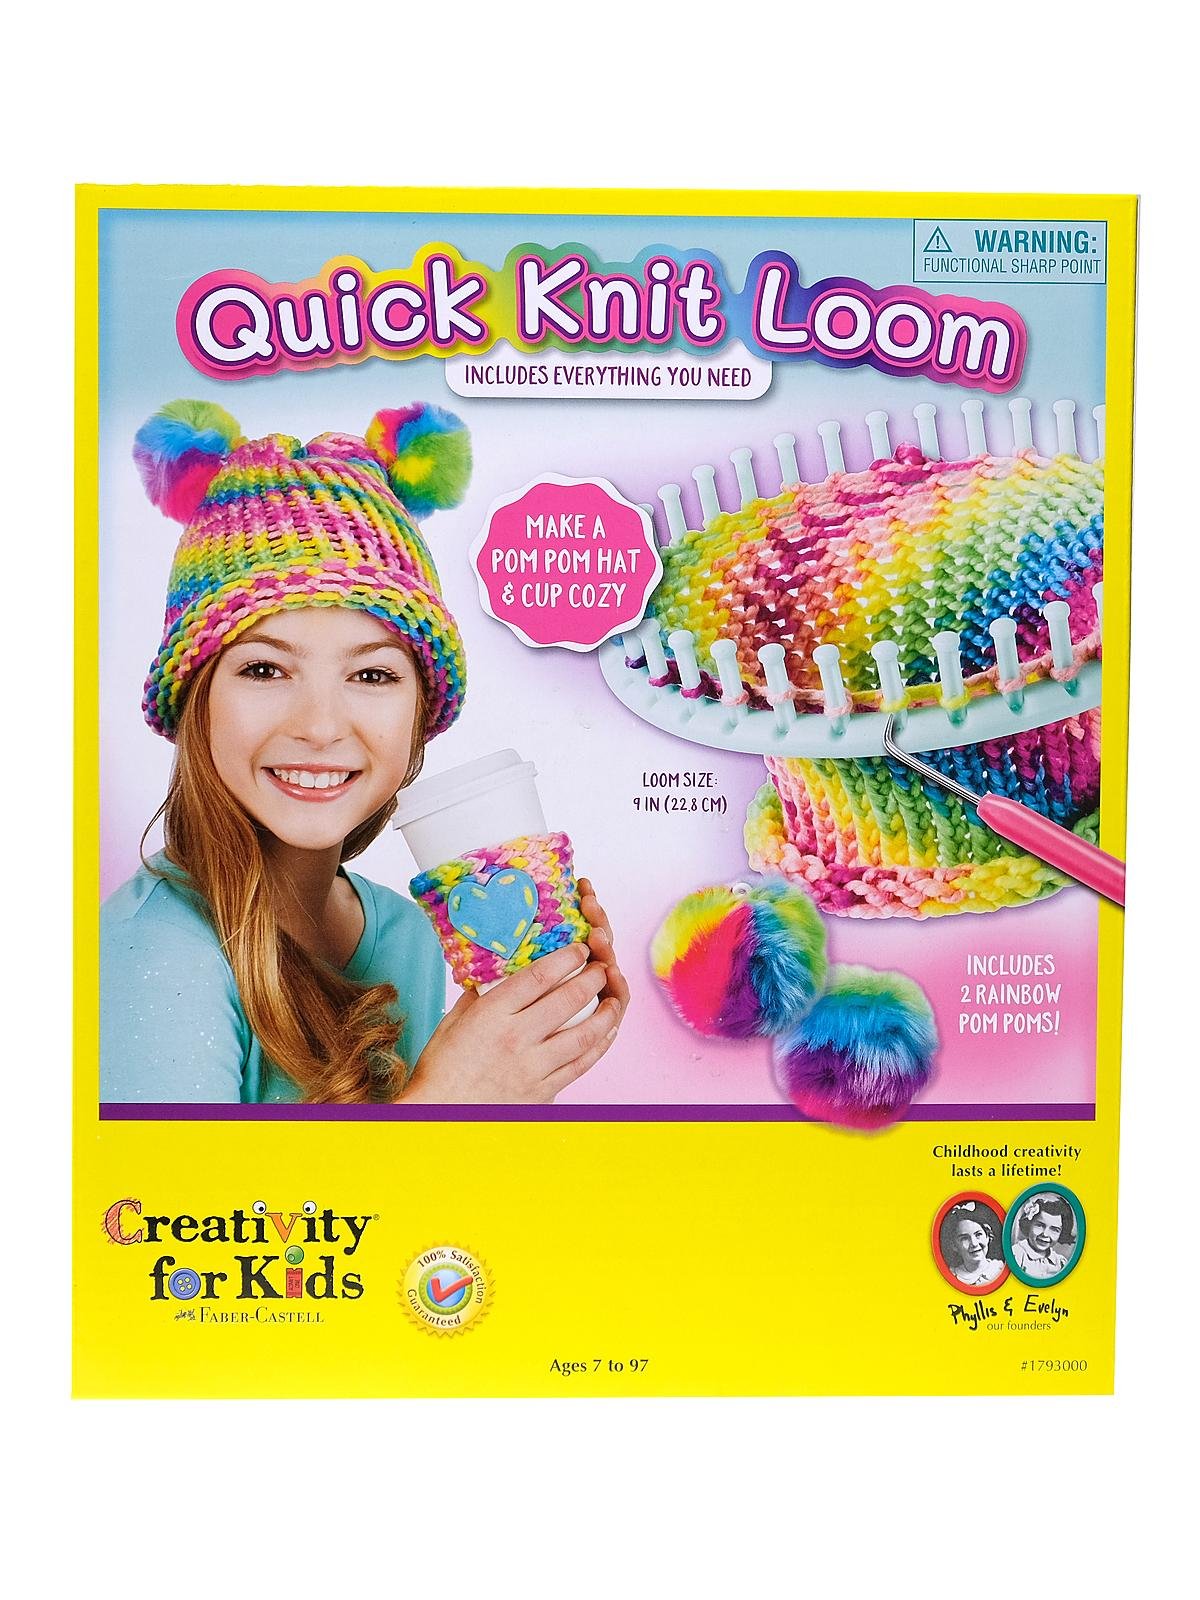 Creativity For Kids - Quick Knit Loom